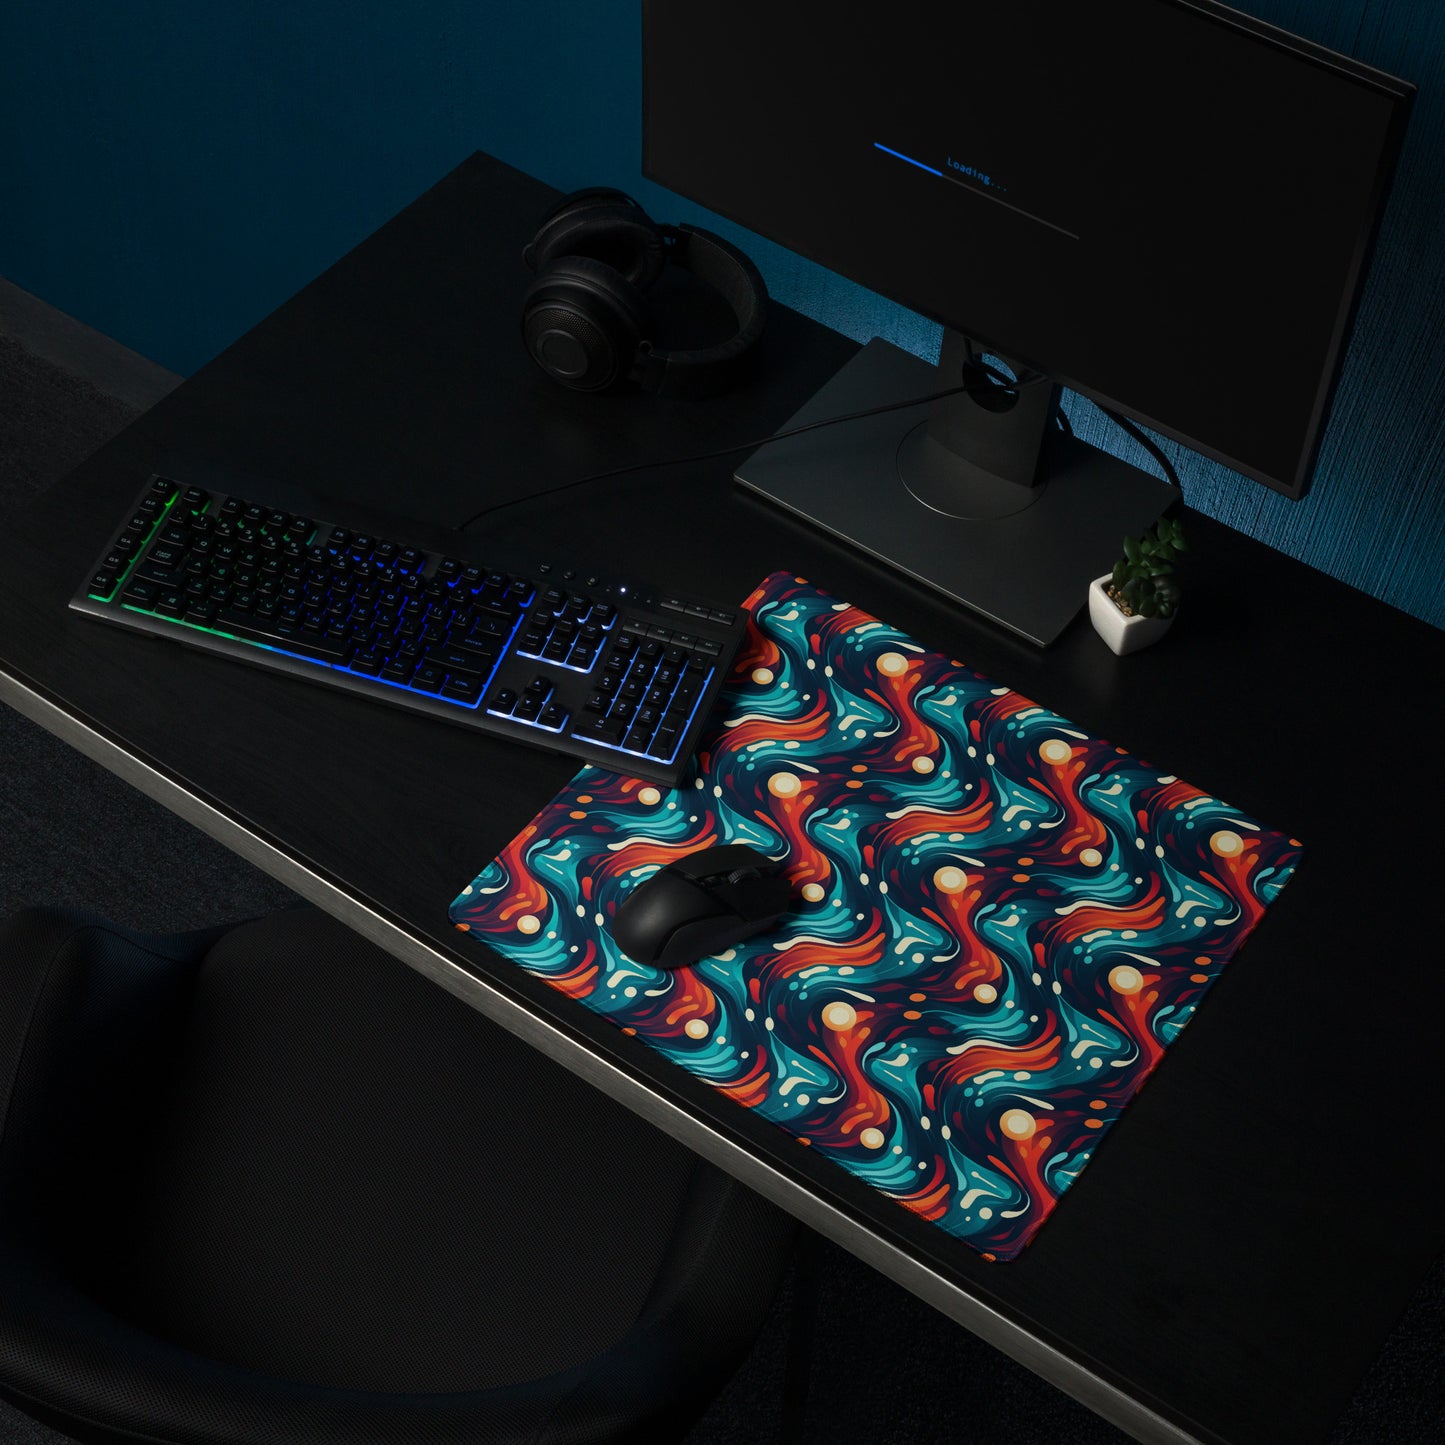 A 18" x 16" desk pad with a blue and orange wavy pattern sitting on a desk.